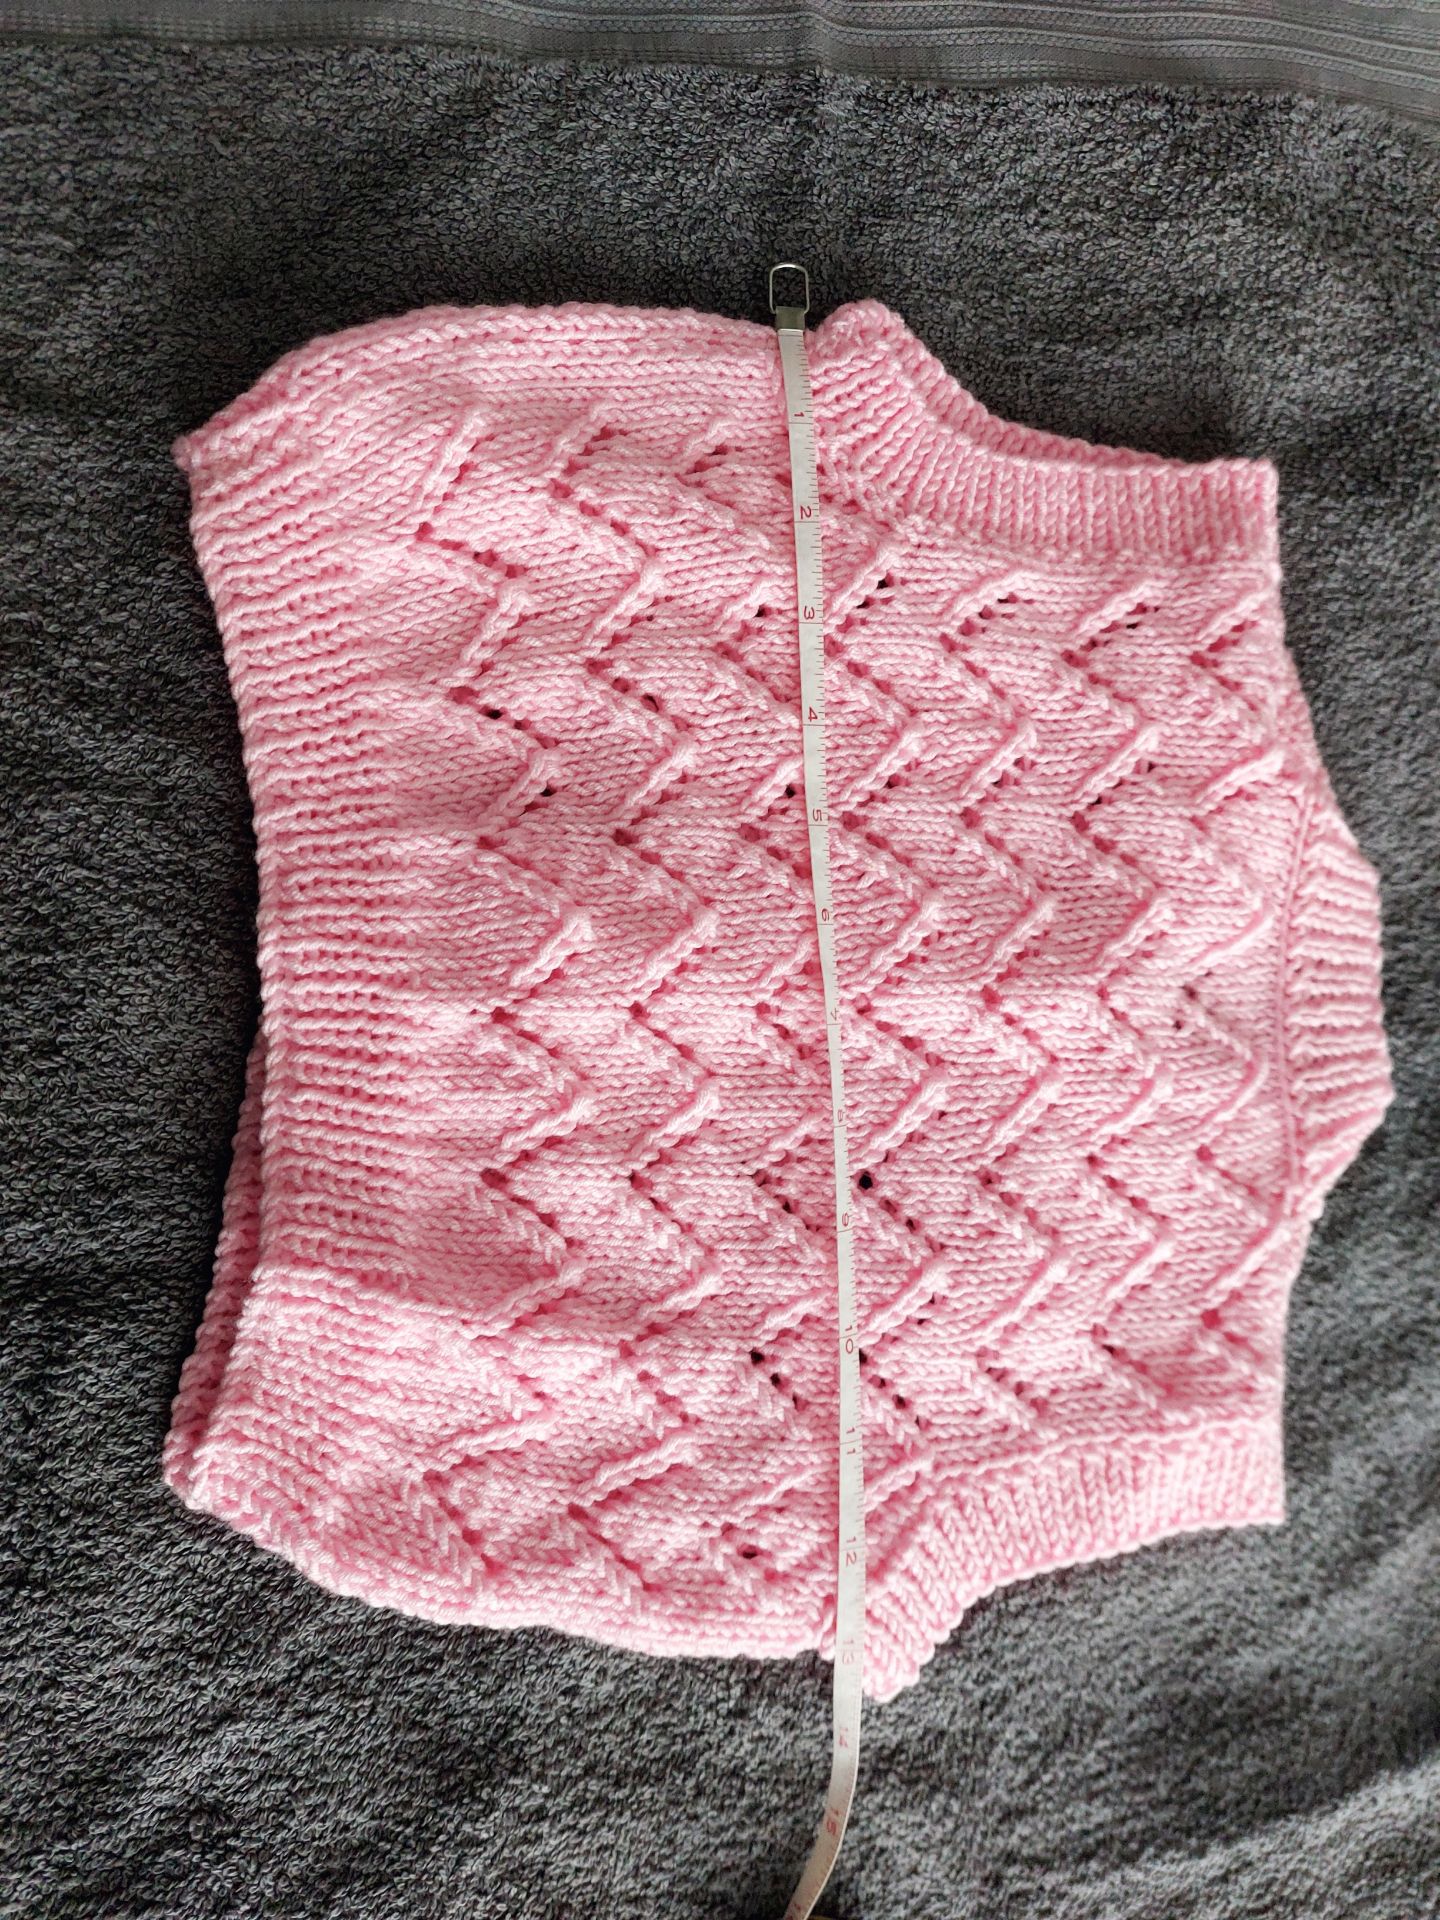 Hand Knitted Gilet - Image 4 of 6